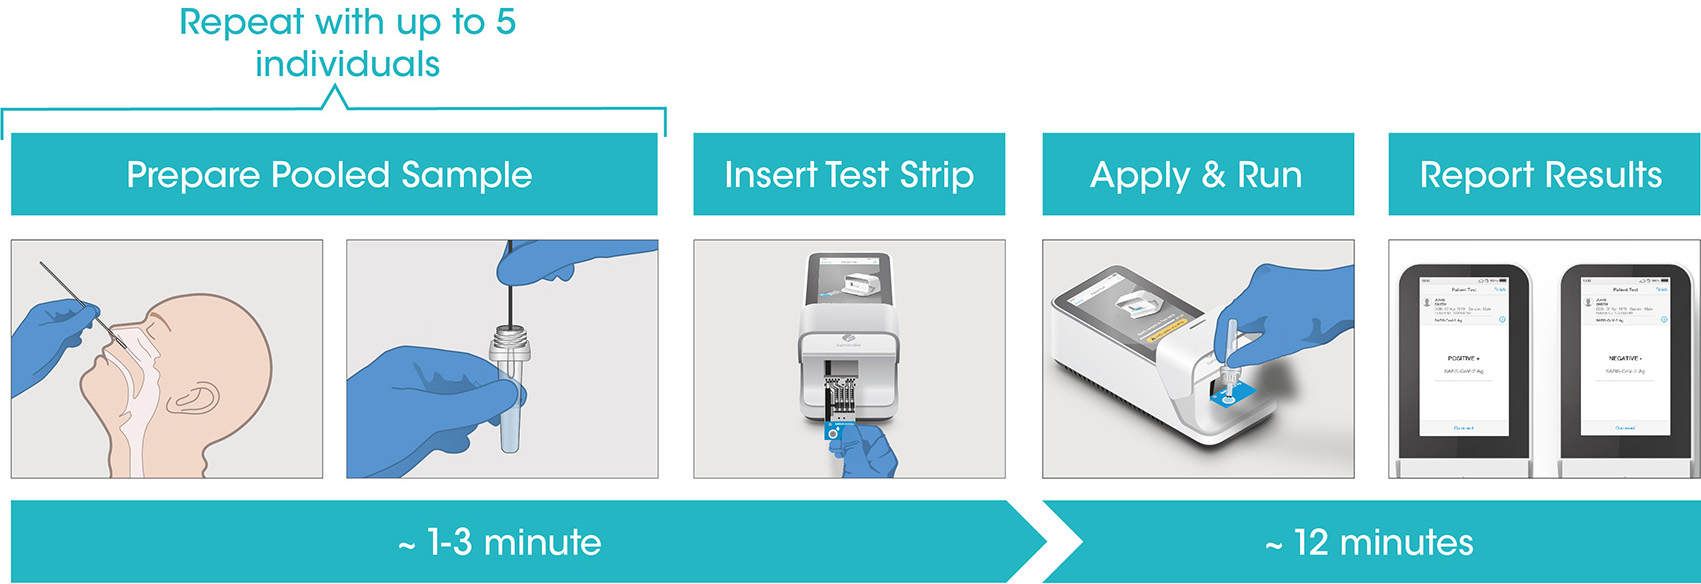 The LumiraDx SARS-CoV-2 Ag Pool Test workflow process is comprised of a simple sample prep along with step-by-step guidance of the Instrument to report a patient result in under 12 minutes from sample application.